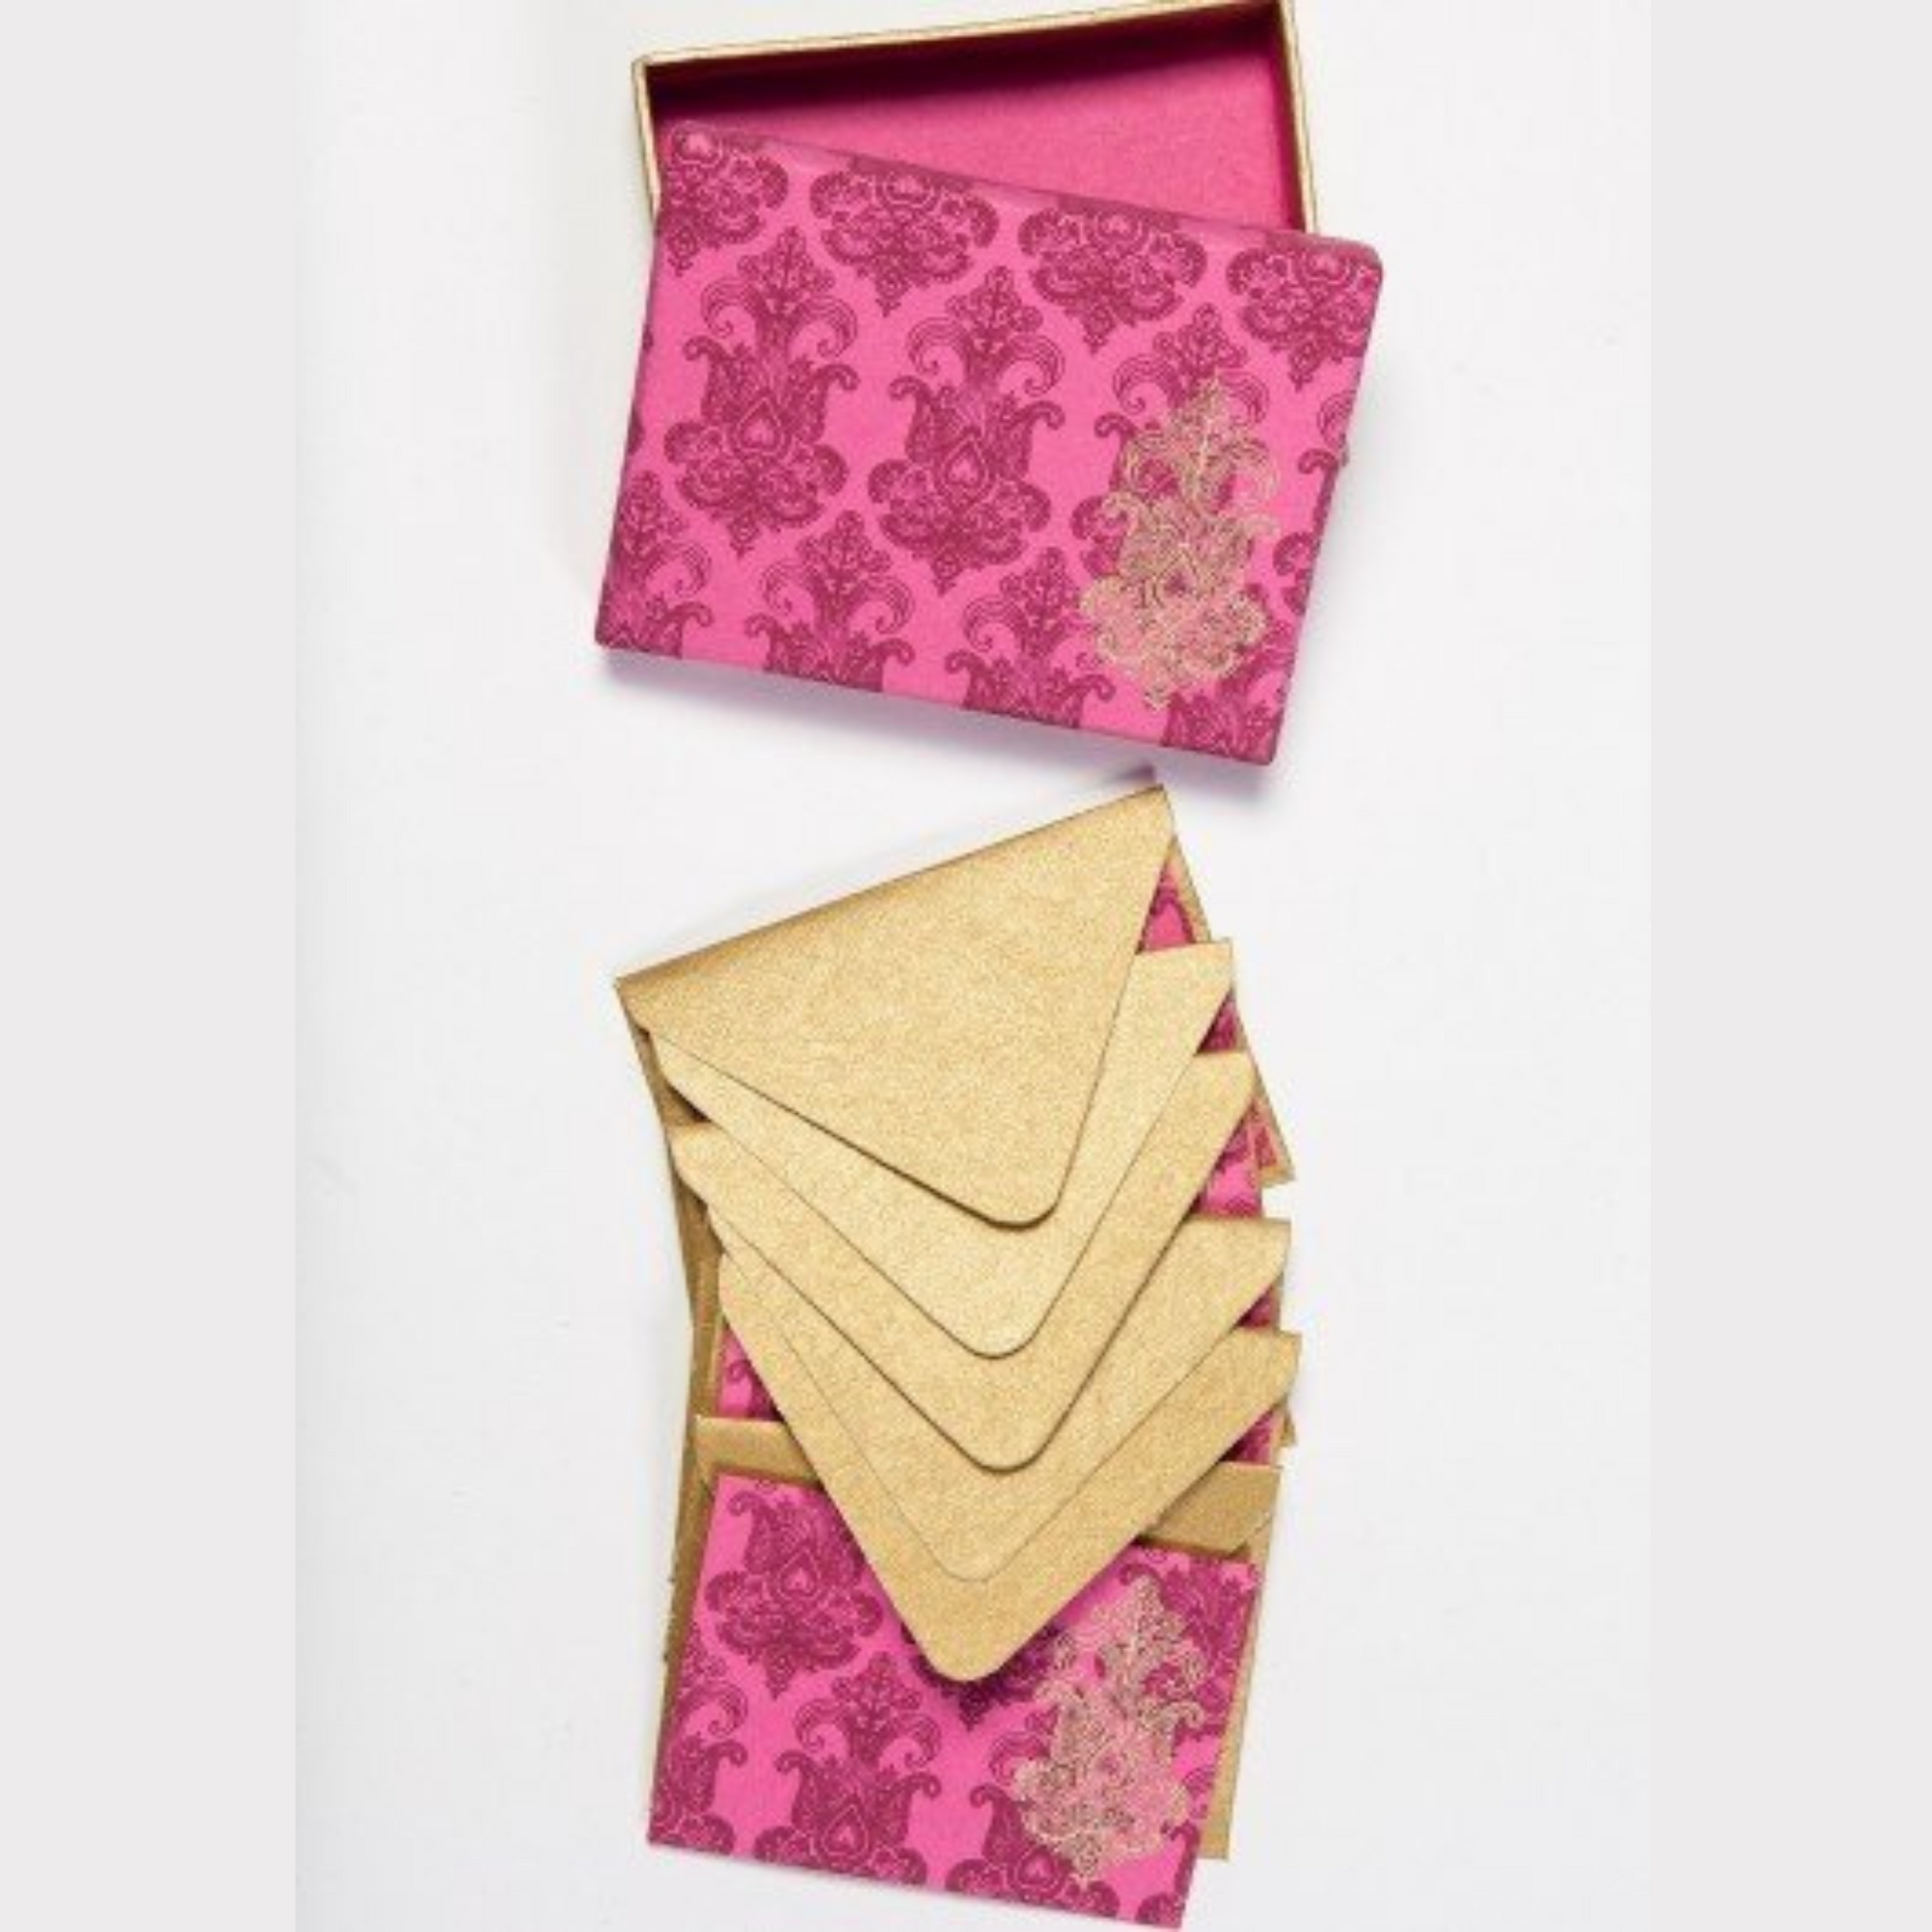 Pink Chandliers blank Notecards with envelope box set